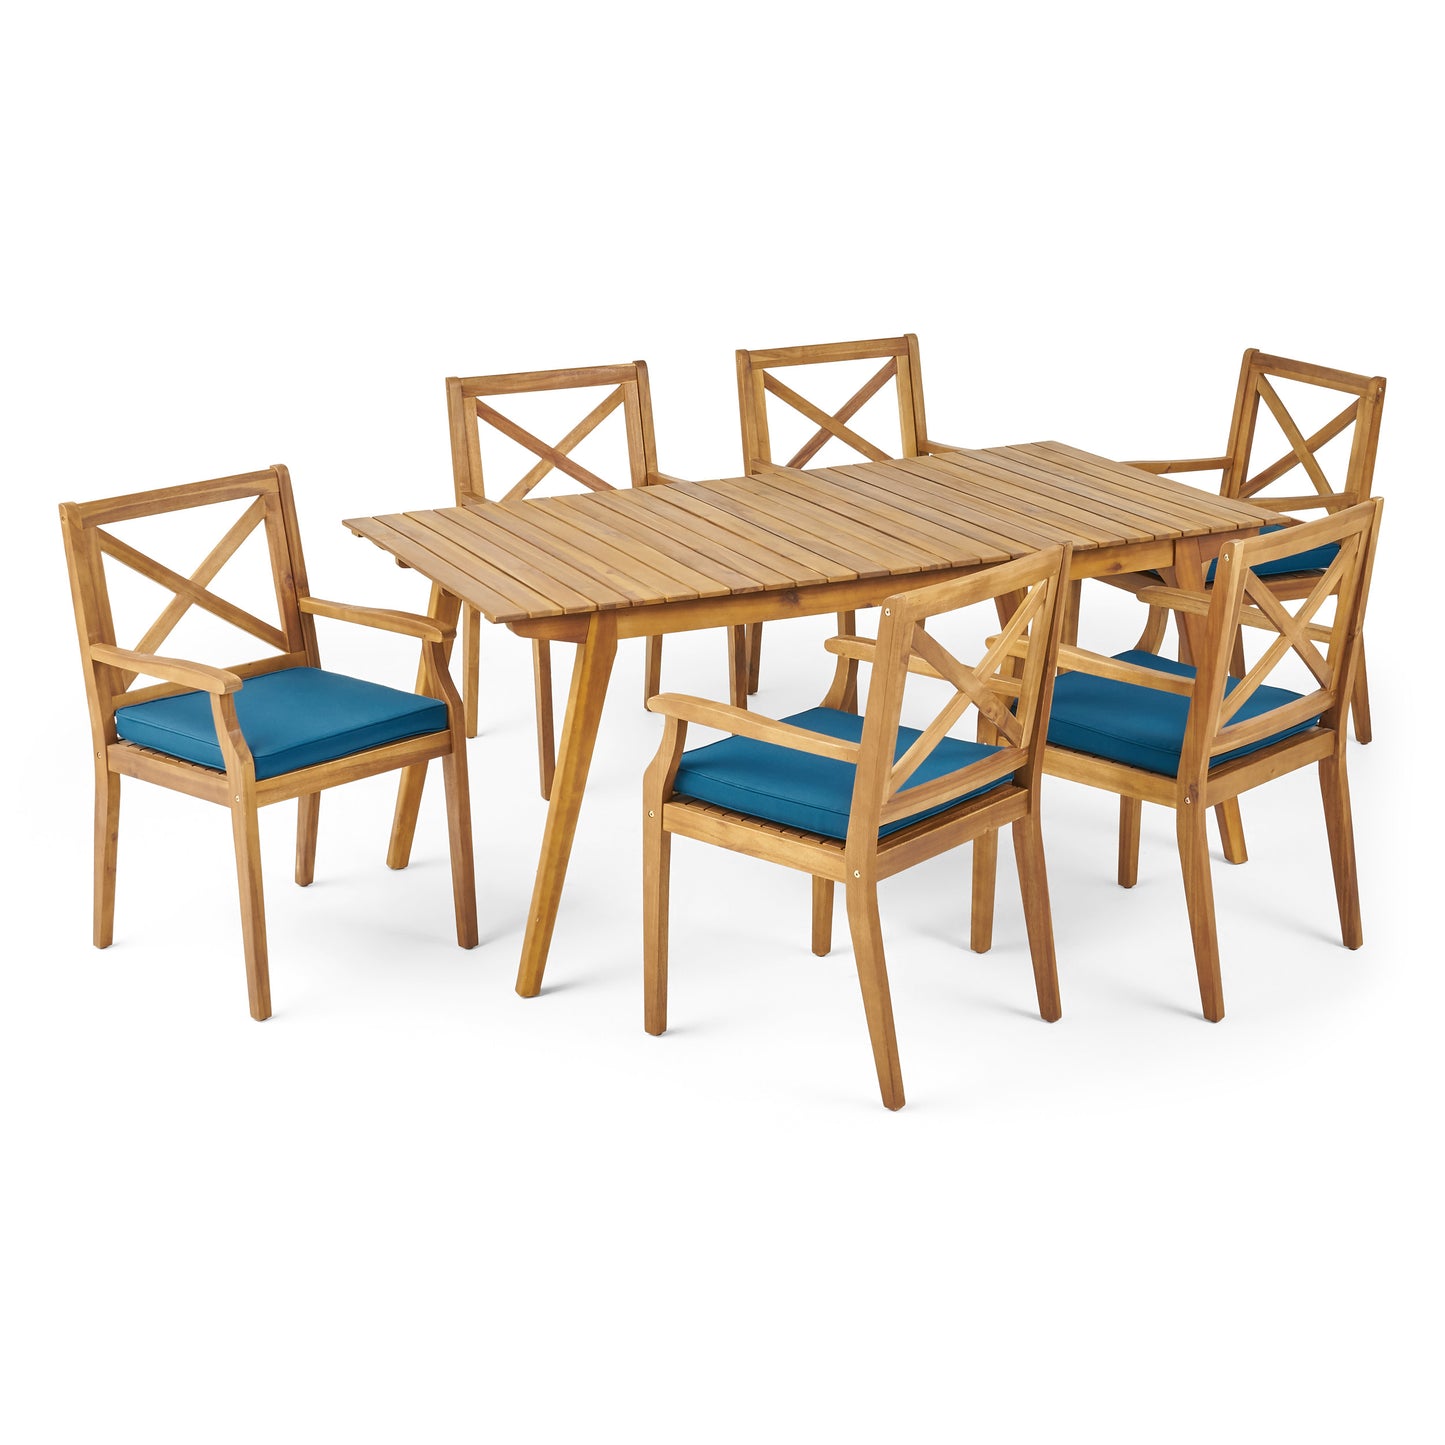 Brinkley Outdoor 7-Piece Acacia Wood Dining Set with Cushions